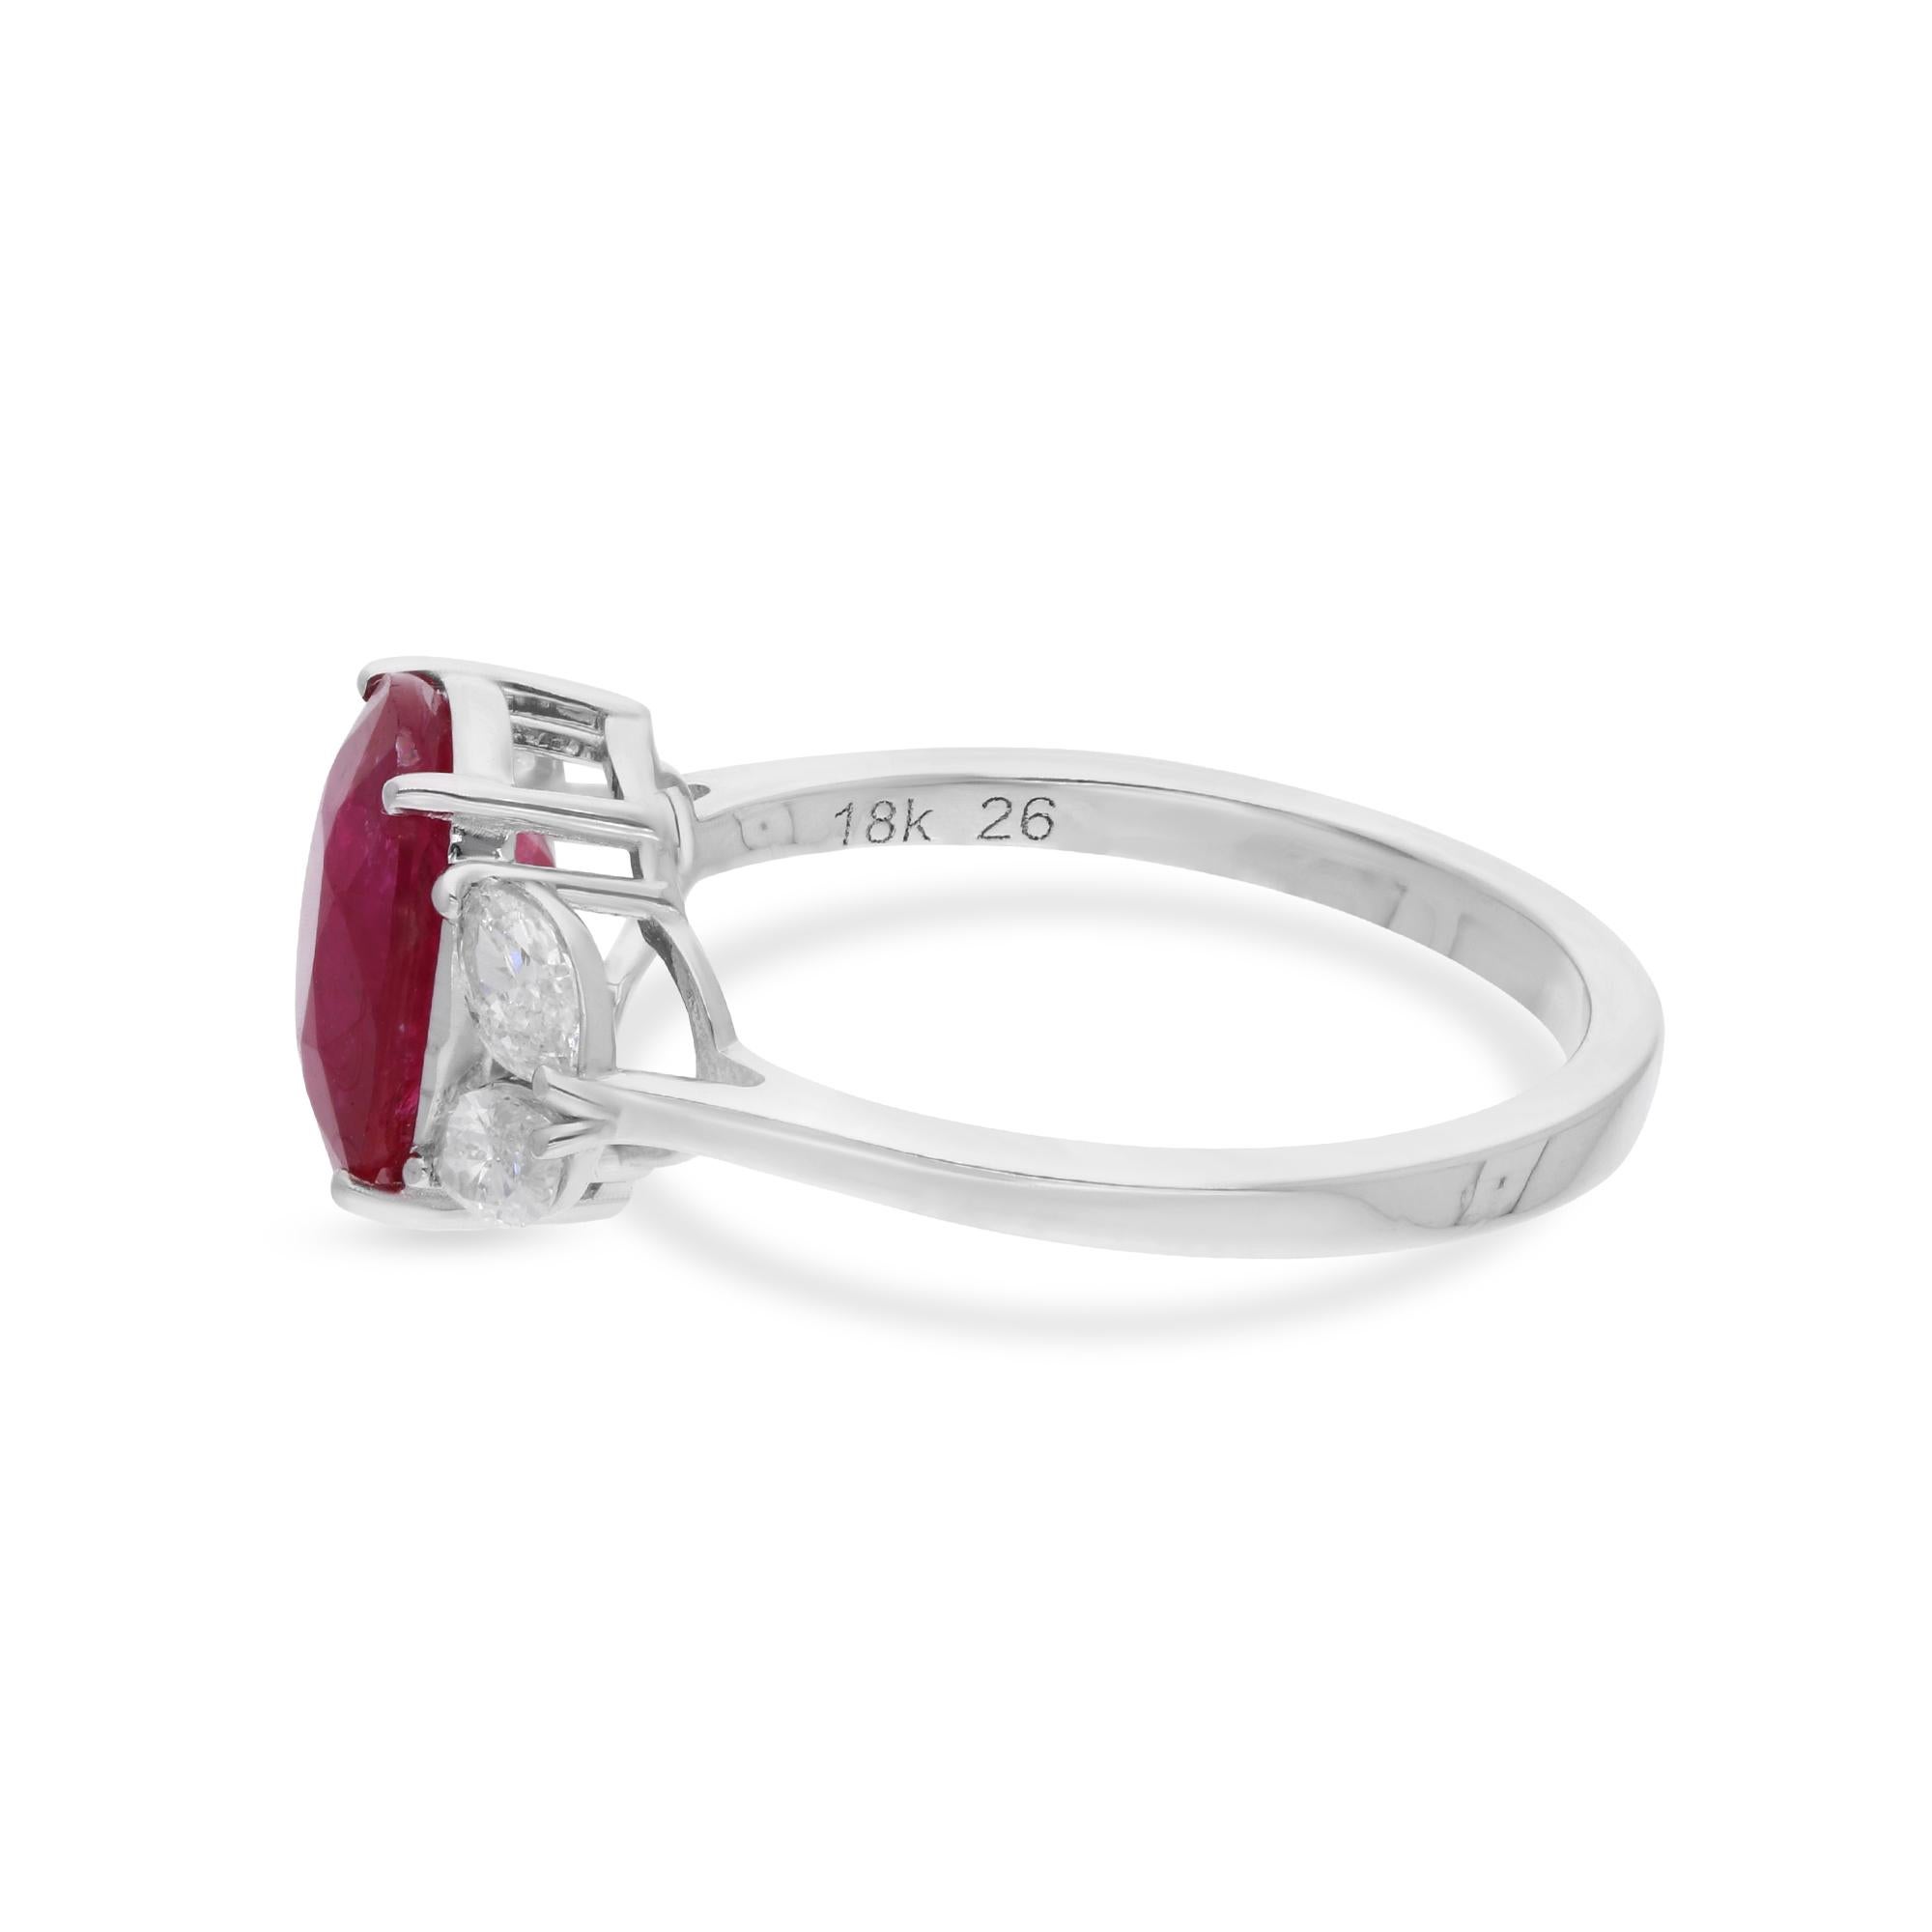 Step into a world of timeless elegance with this Natural Ruby Gemstone Cocktail Ring, adorned with exquisite marquise diamonds and meticulously crafted in 14 karat white gold. This stunning piece of fine jewelry is a celebration of sophistication